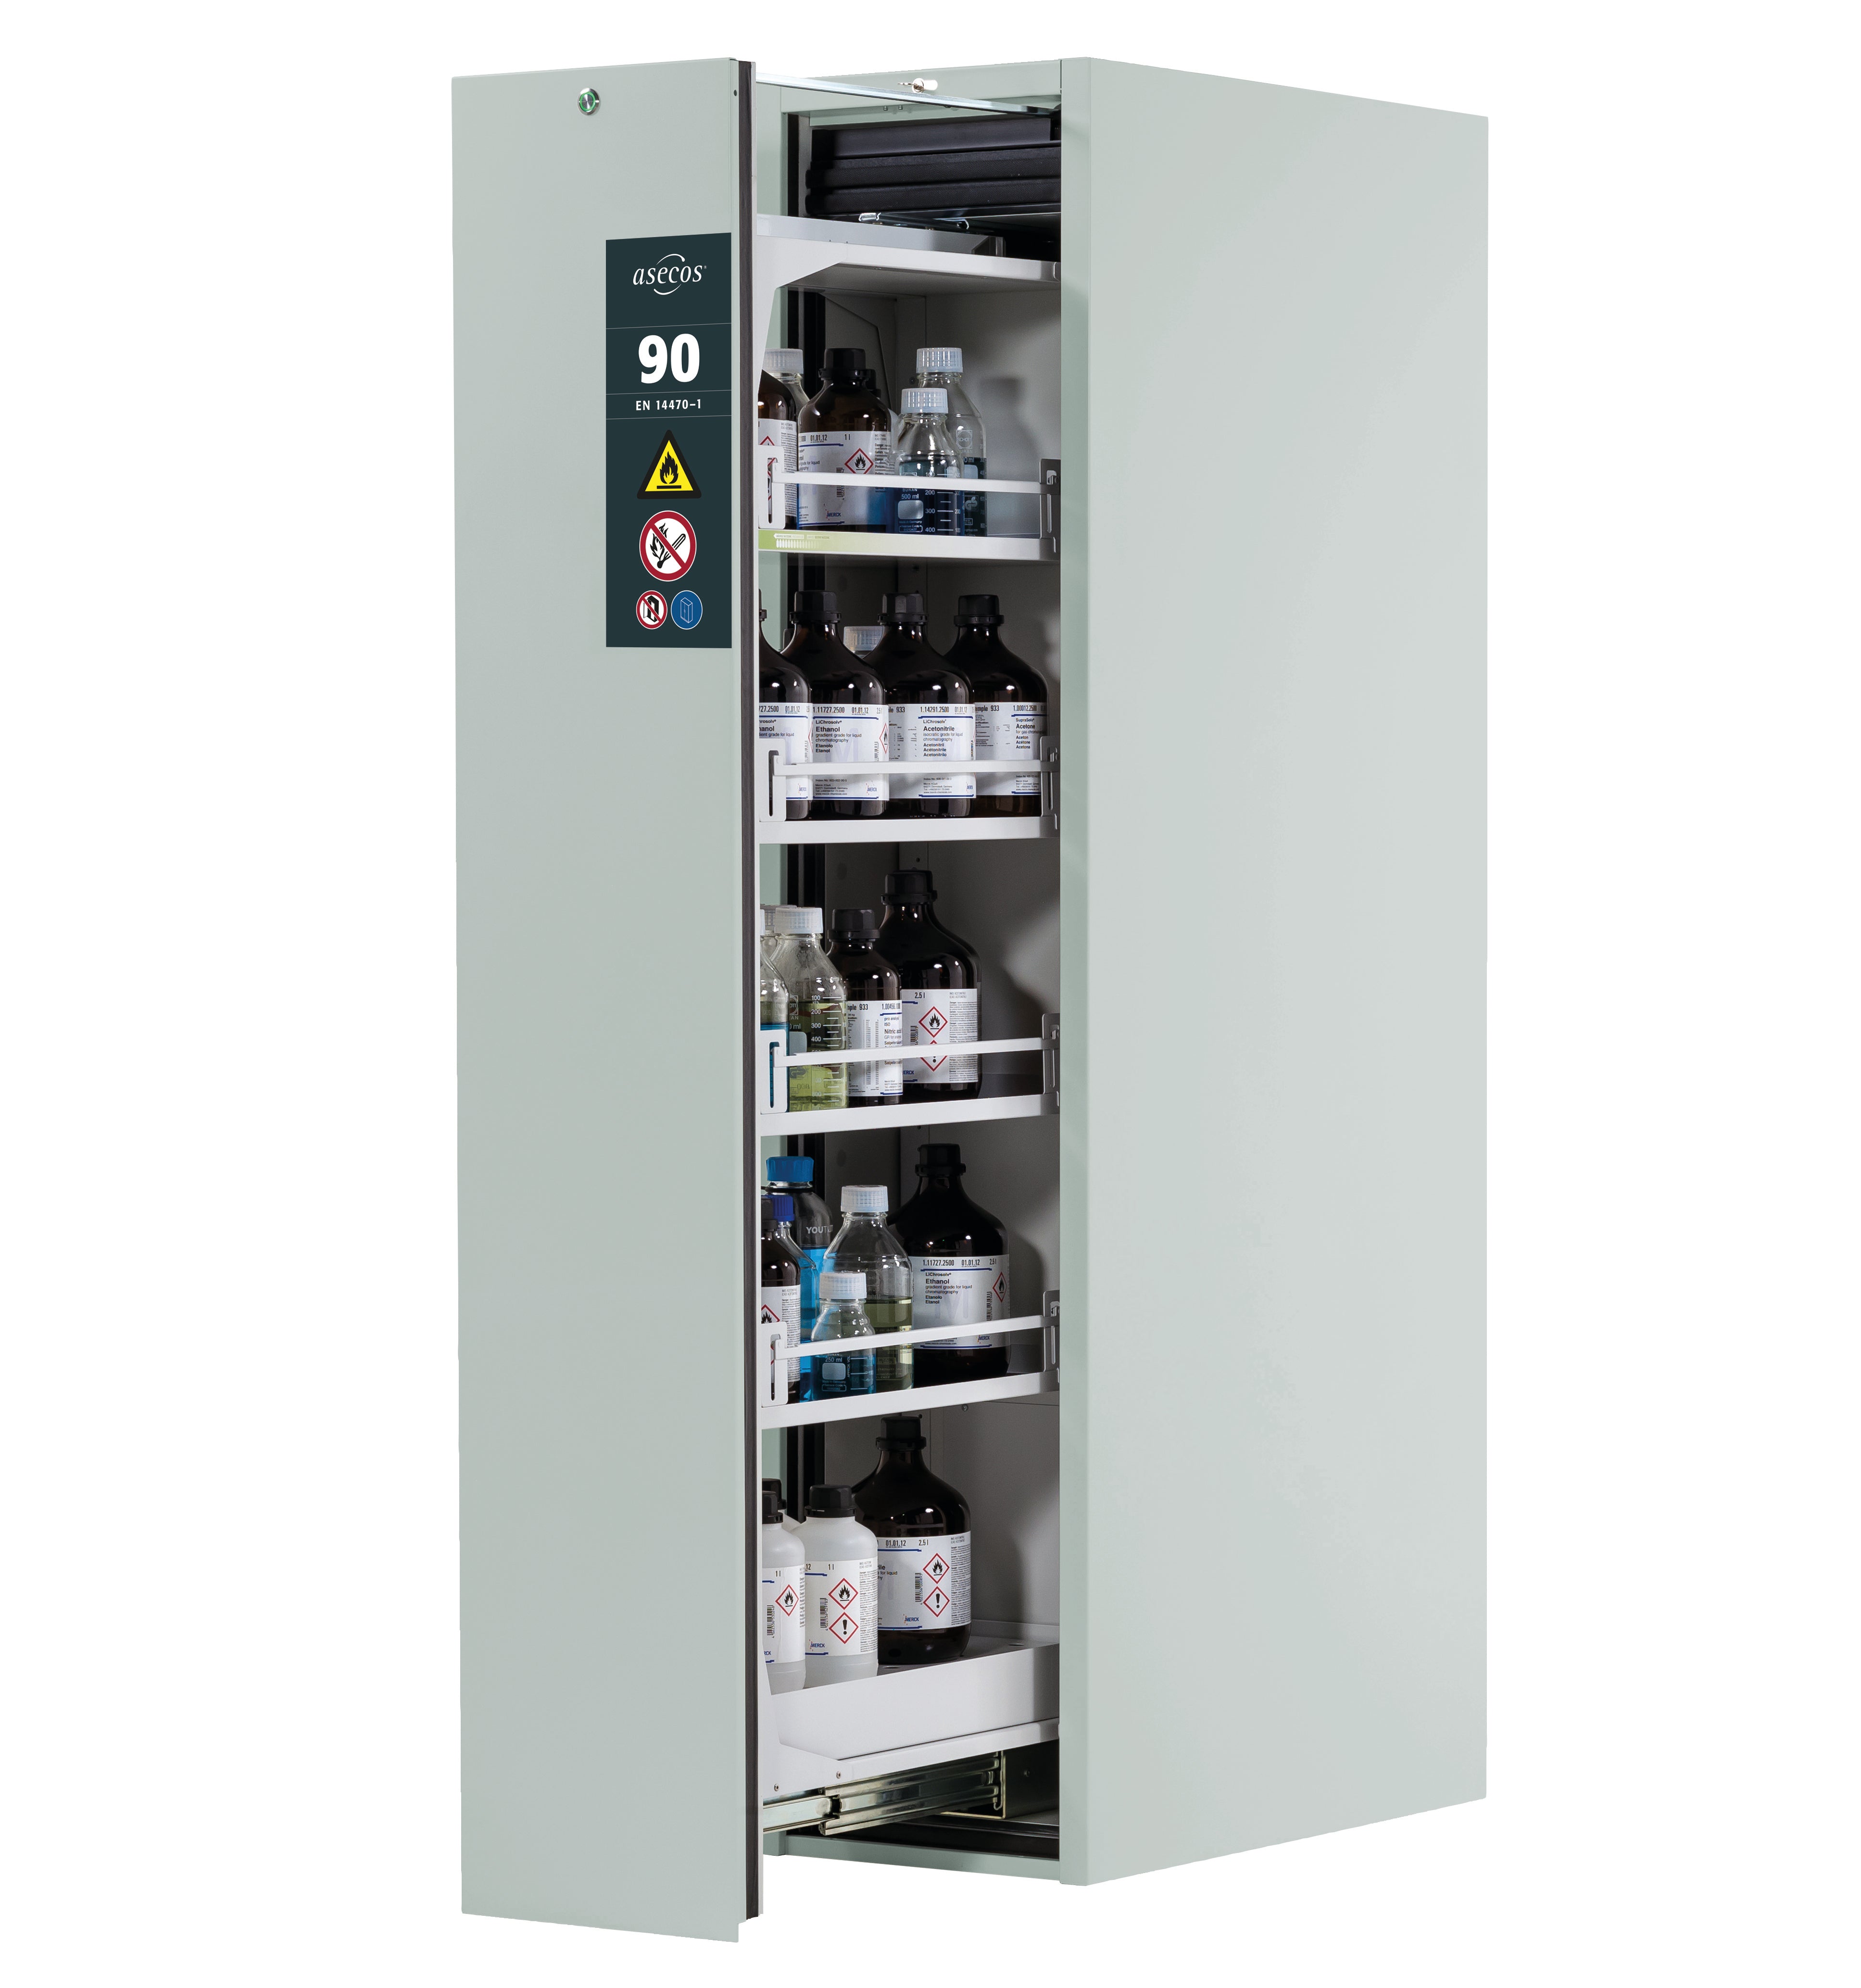 Type 90 safety cabinet V-MOVE-90 model V90.196.045.VDAC:0012 in light gray RAL 7035 with 4x standard shelves (sheet steel)